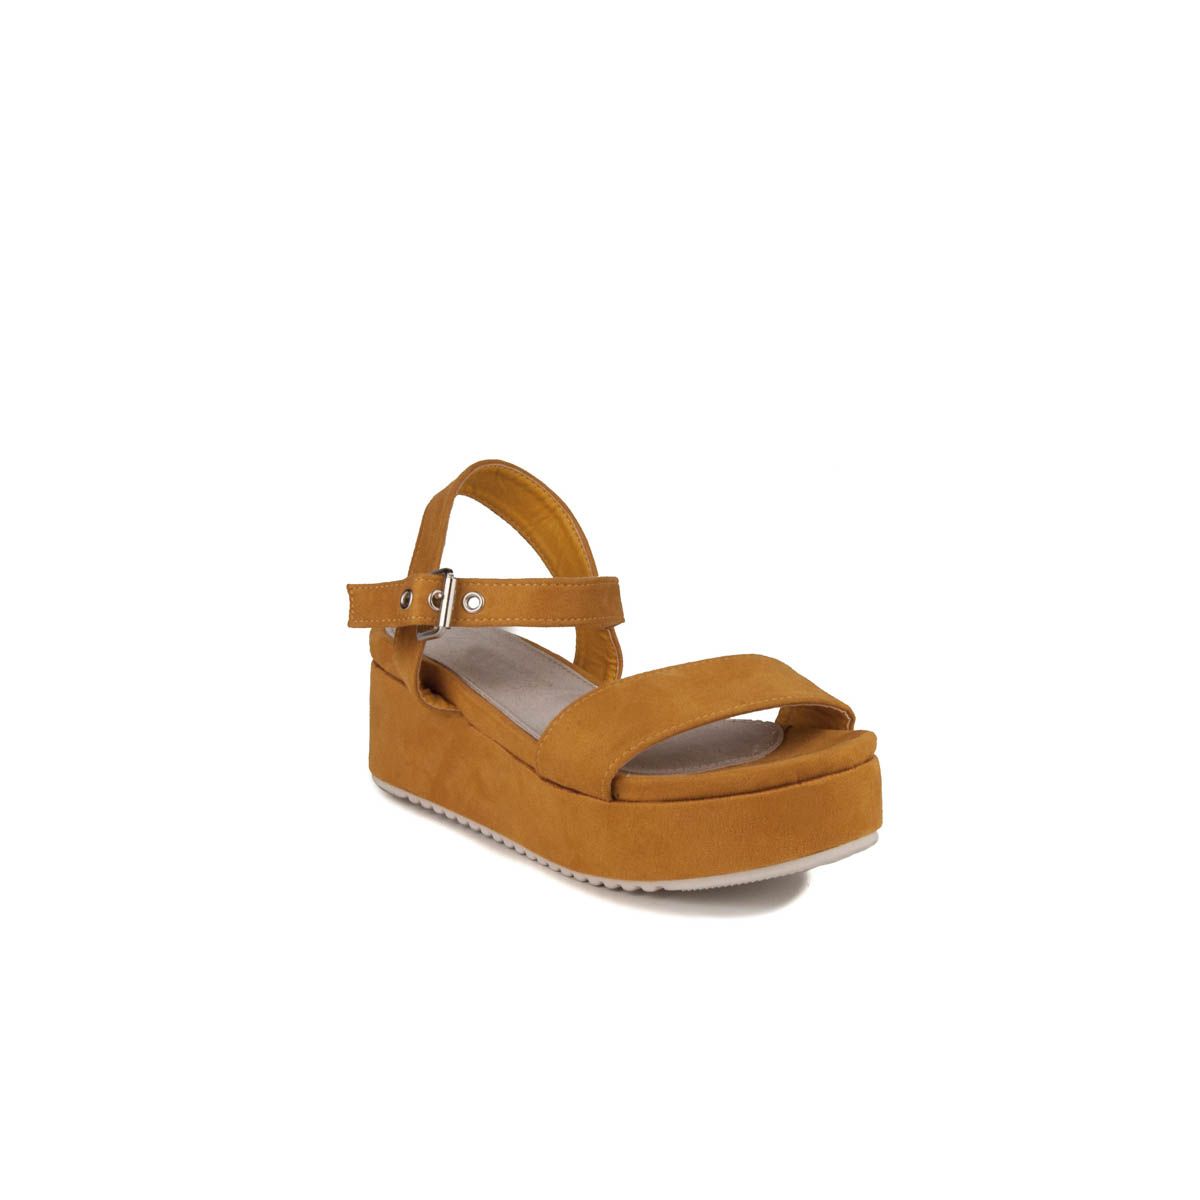 6.5 cm wedge and 4 platform that are perfect for a summer sandal that you can use with everything. His height compensation is great because it seems that you go flat. Bio-type Hormo with padded tel. Easy cleaning material and spoto lined wedge. Anti-slip rubber floor.